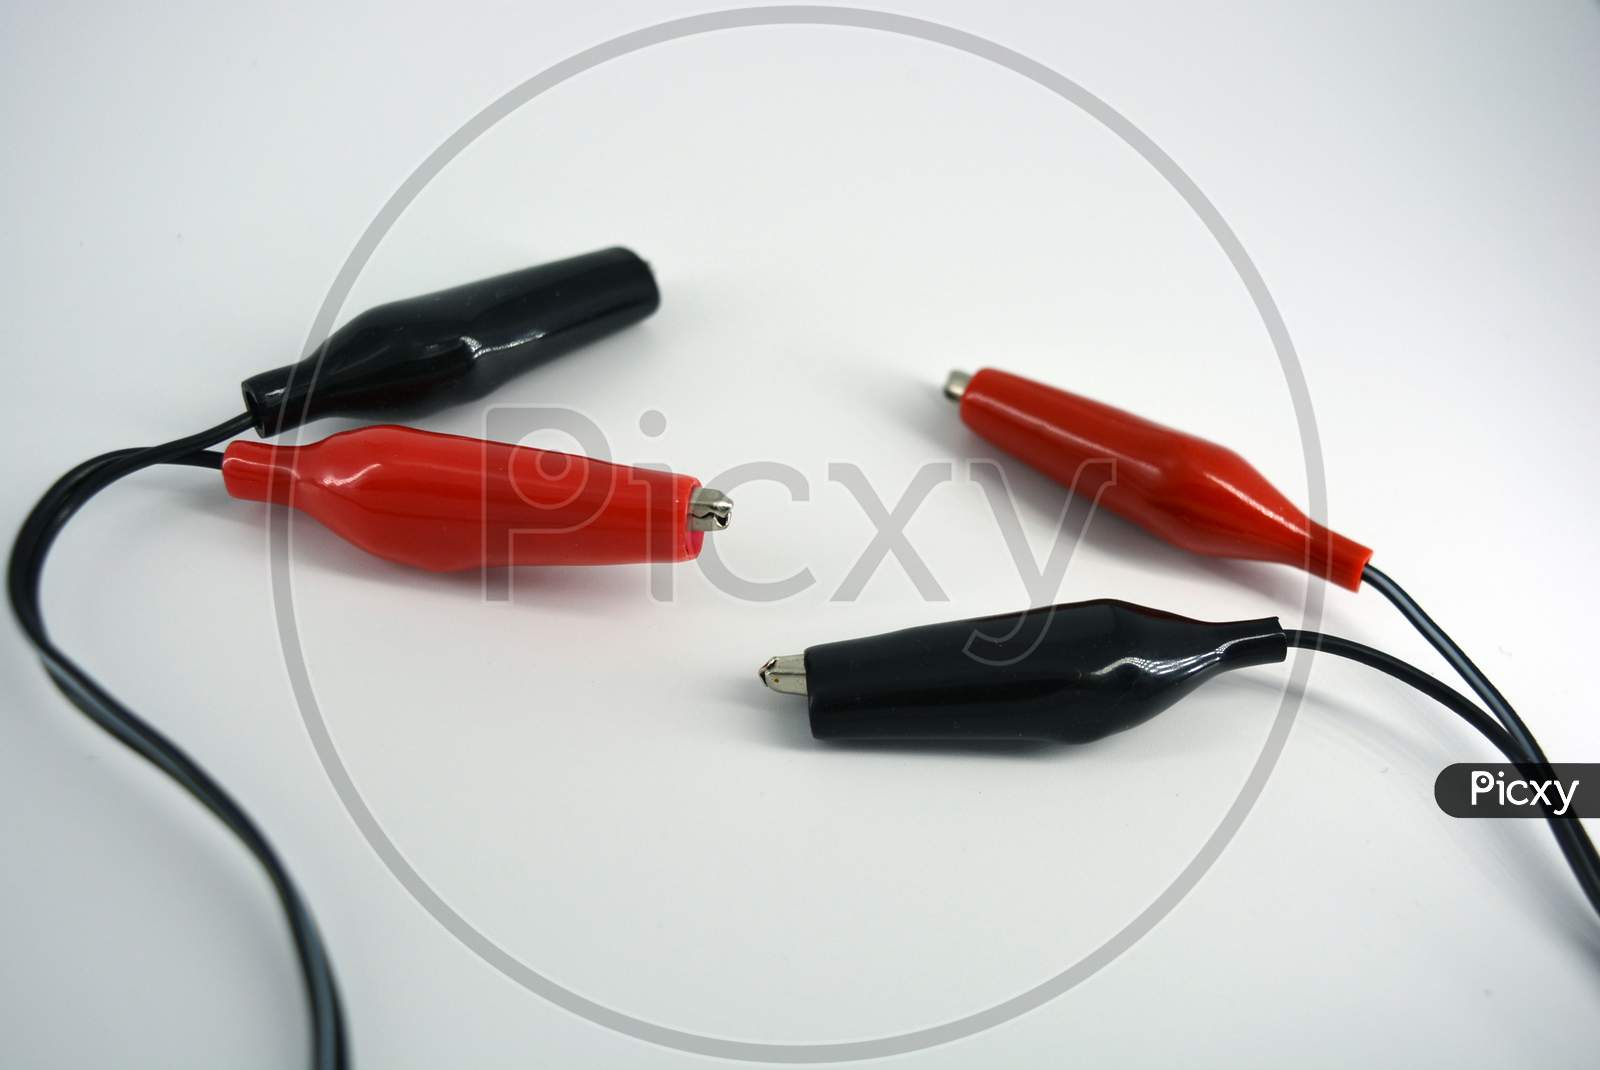 Black wire with red and black insulation, rubber and metal crocodiles for lining to the wire located on a white background.